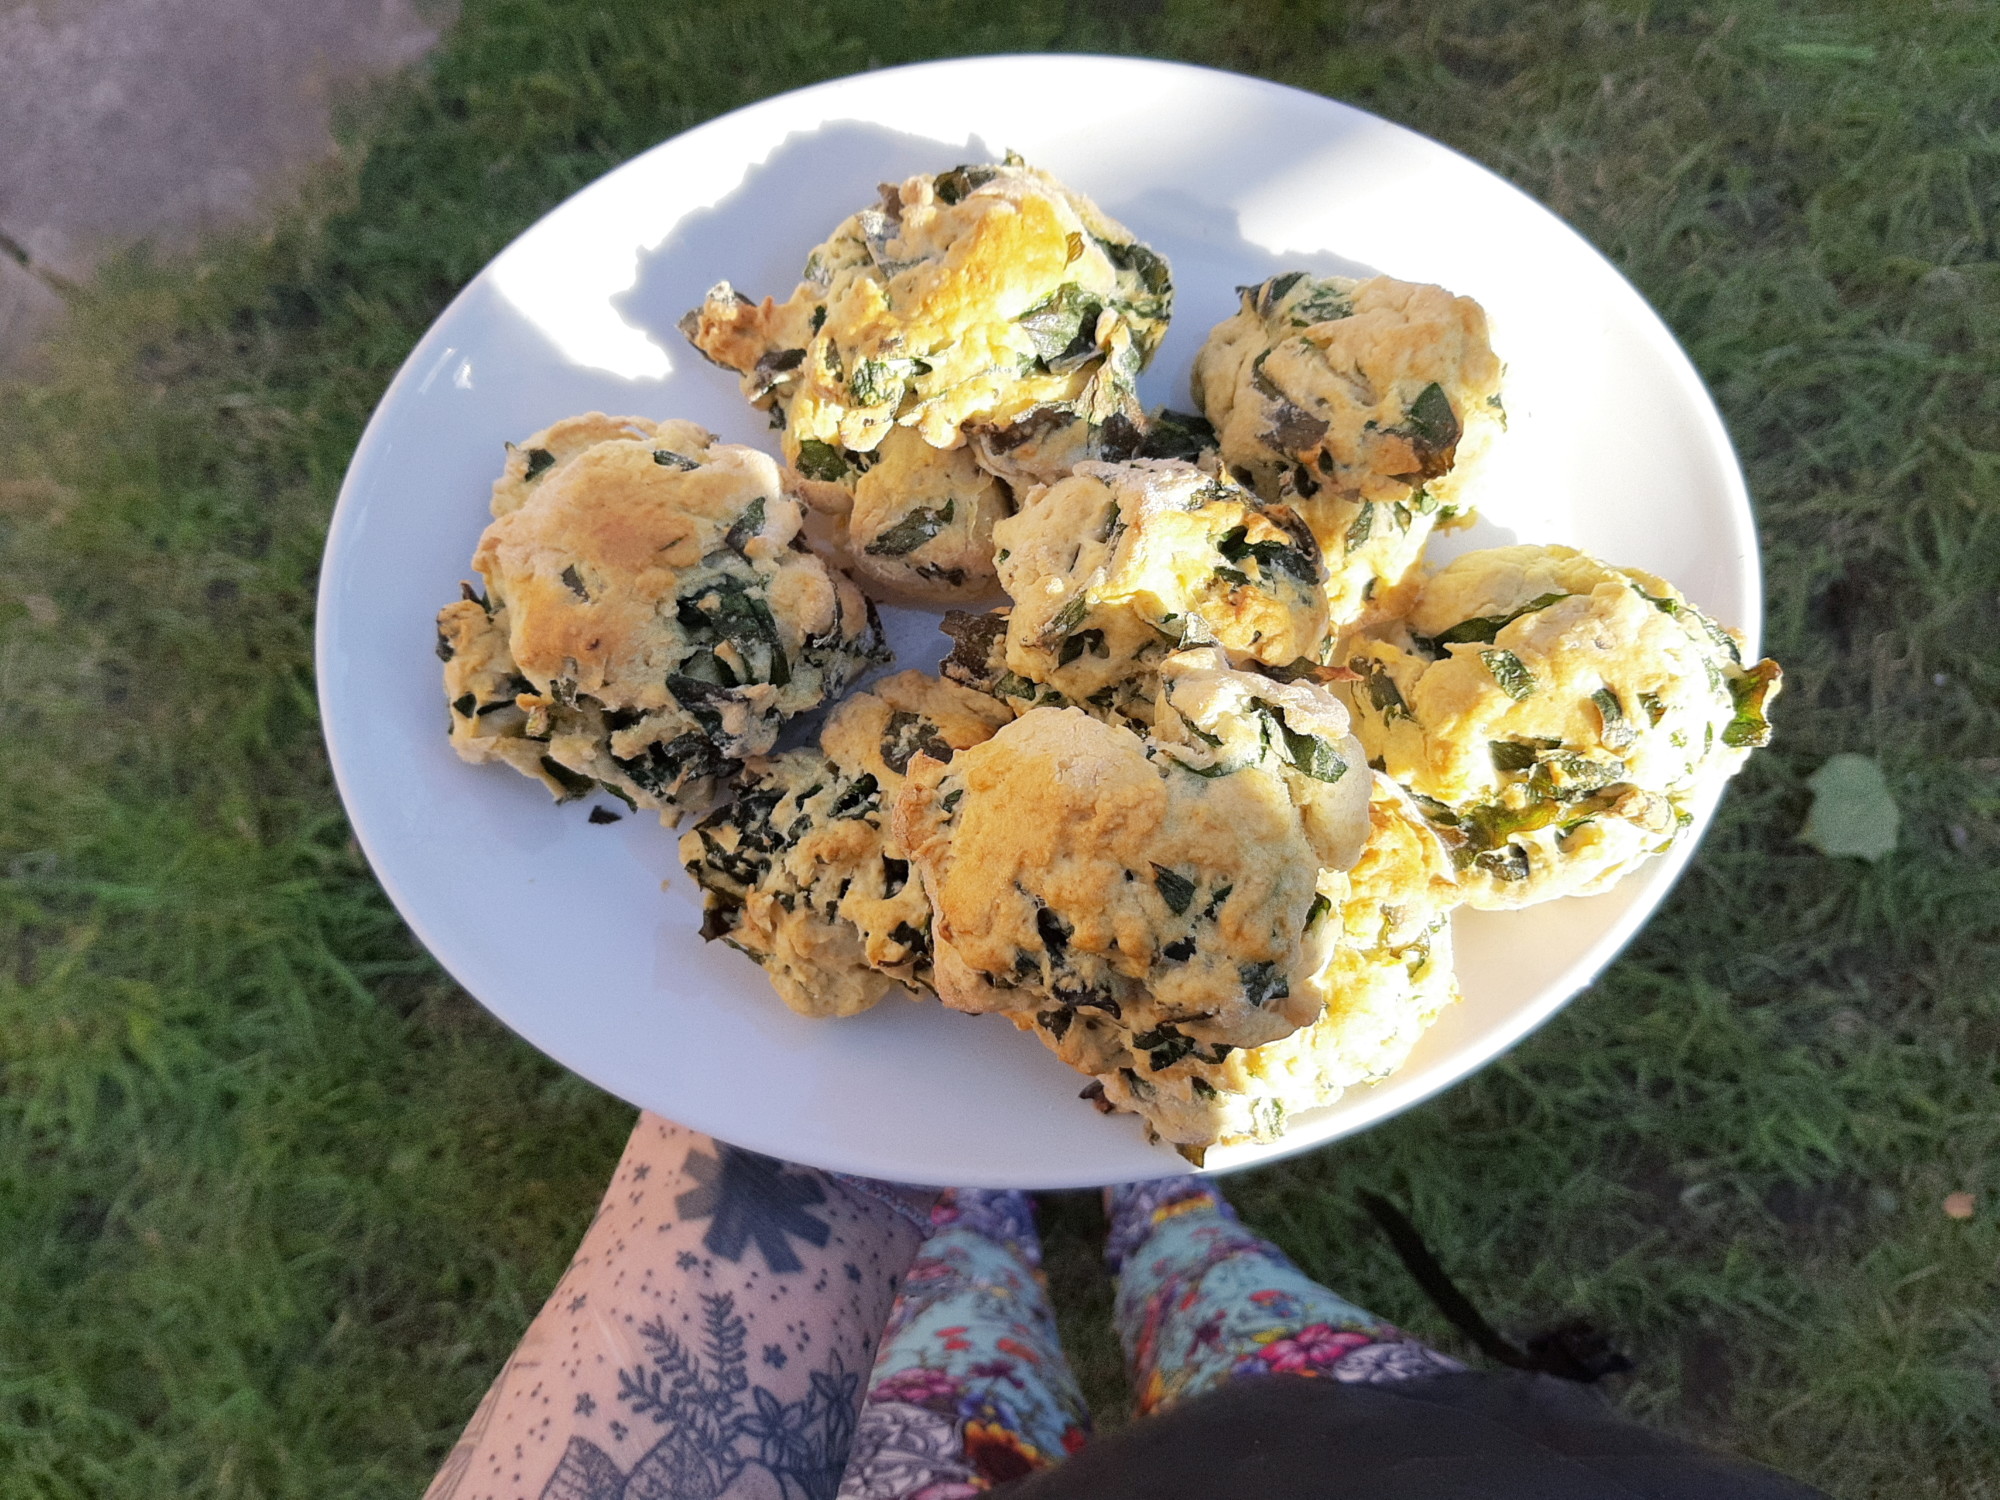 a plate showing freshly baked vegan wild garlic and cheese scones